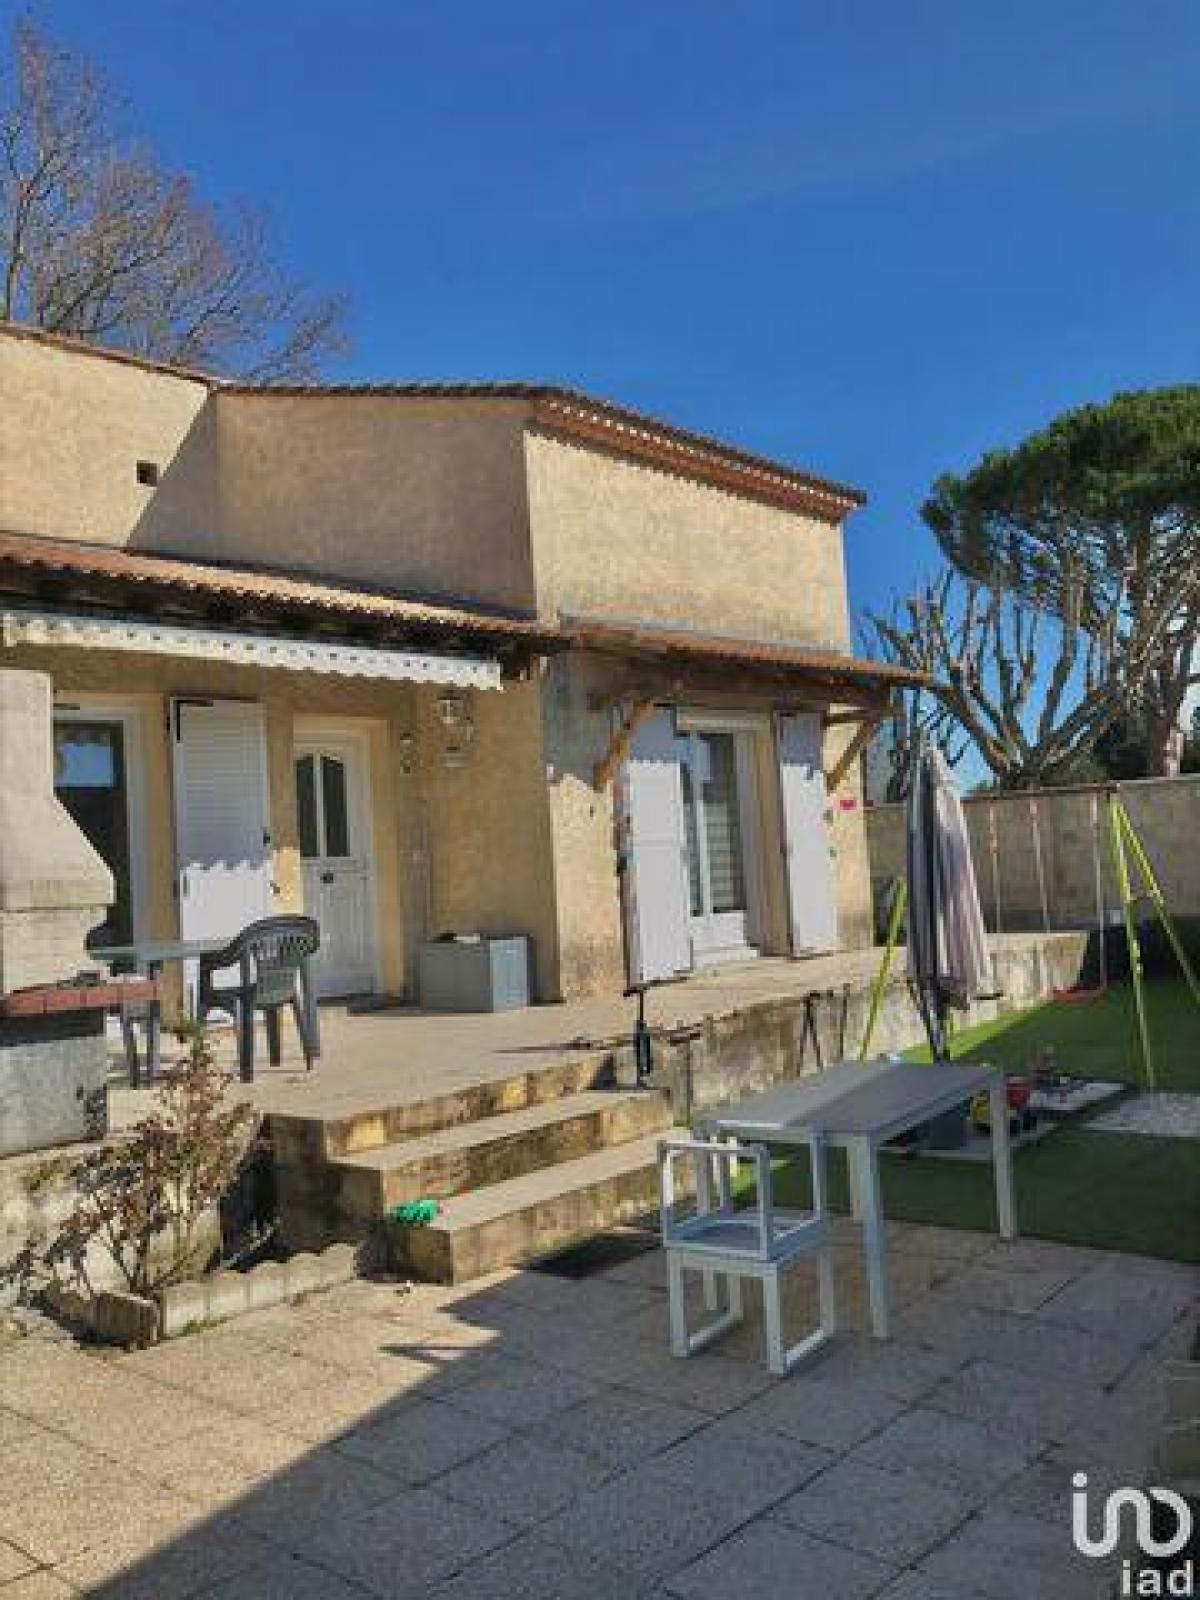 Picture of Home For Sale in Le Pontet, Provence-Alpes-Cote d'Azur, France